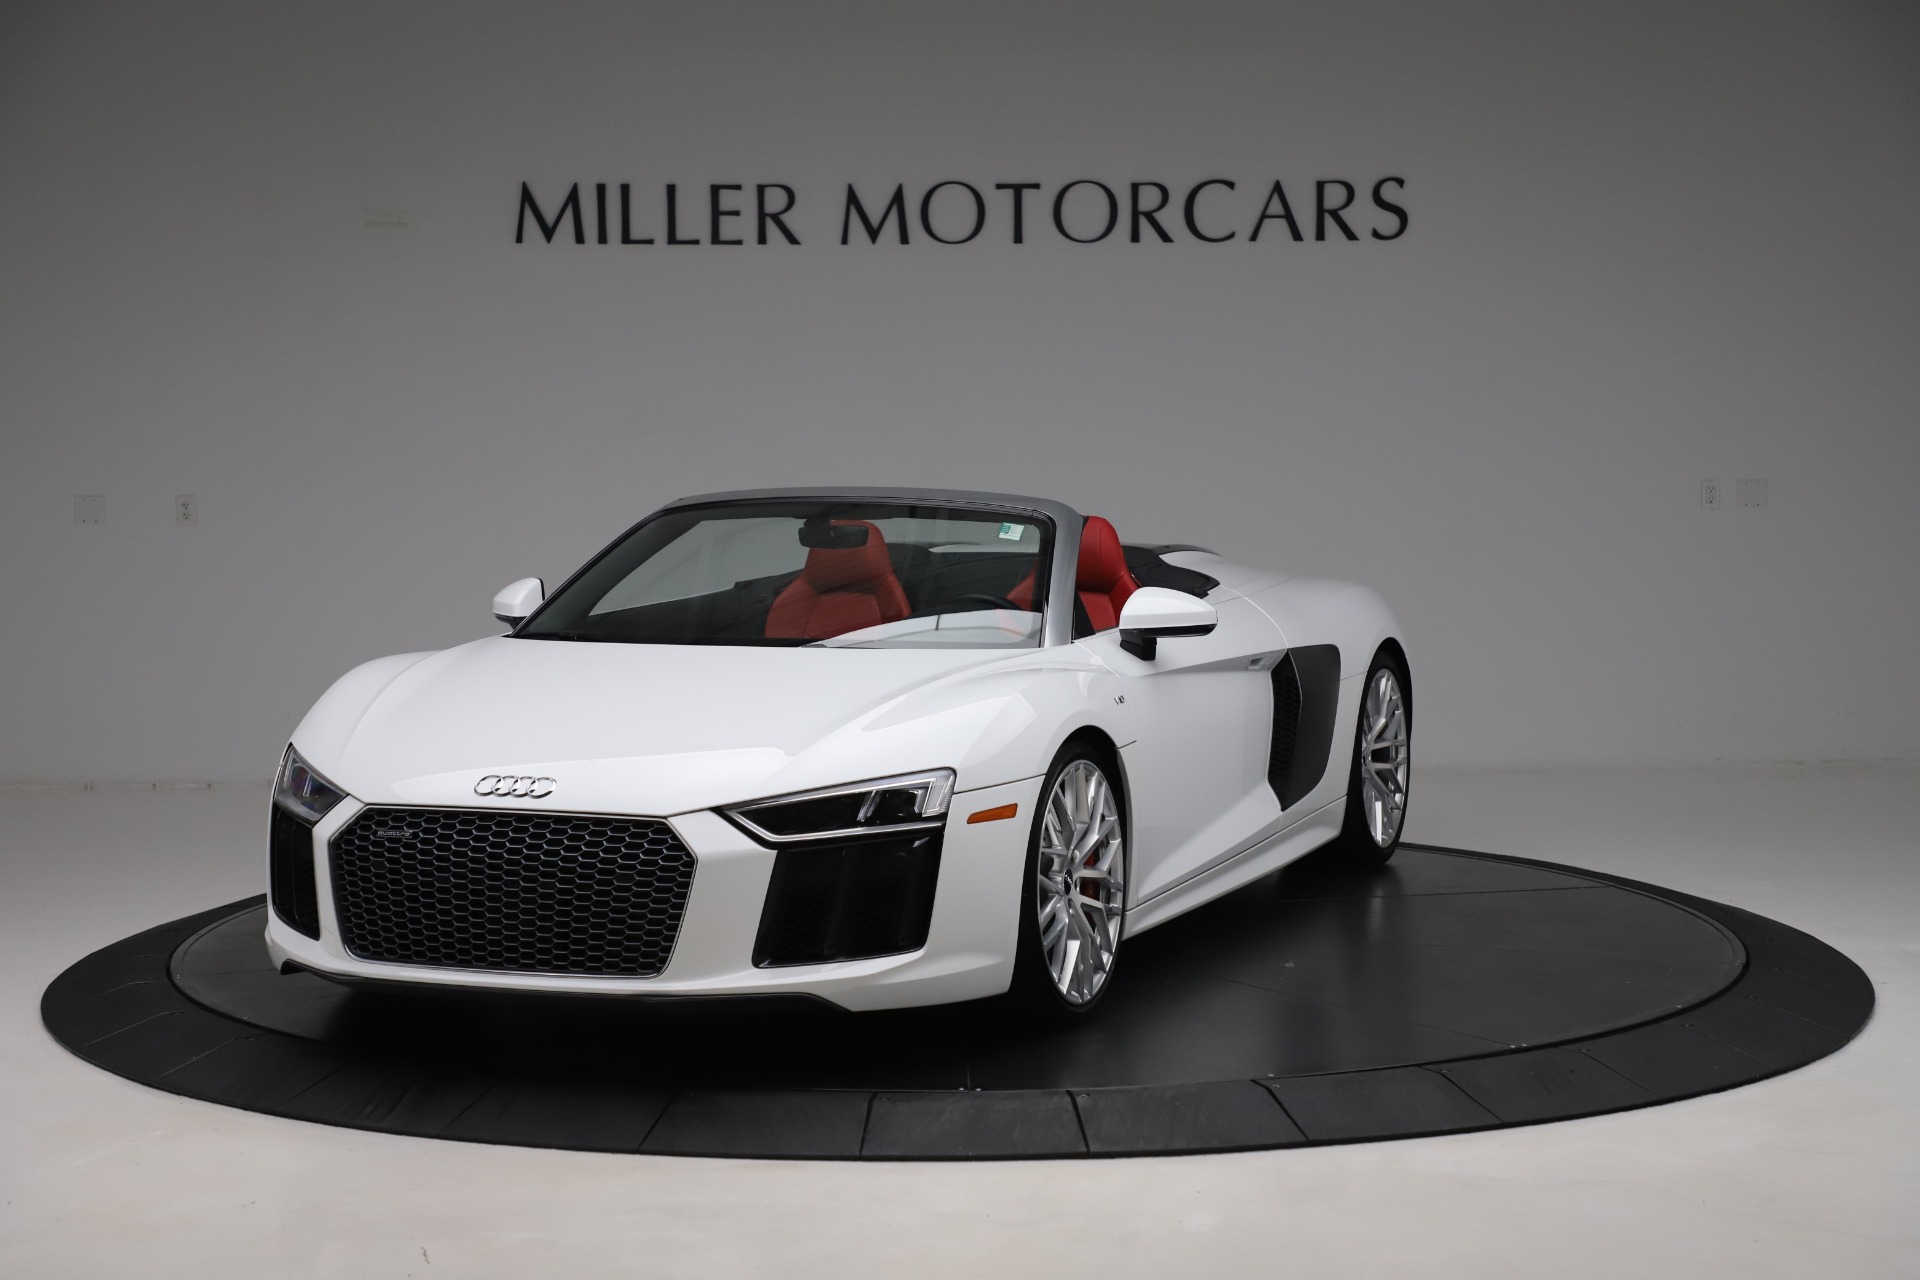 Used 2017 Audi R8 5.2 quattro V10 Spyder for sale Sold at Maserati of Greenwich in Greenwich CT 06830 1